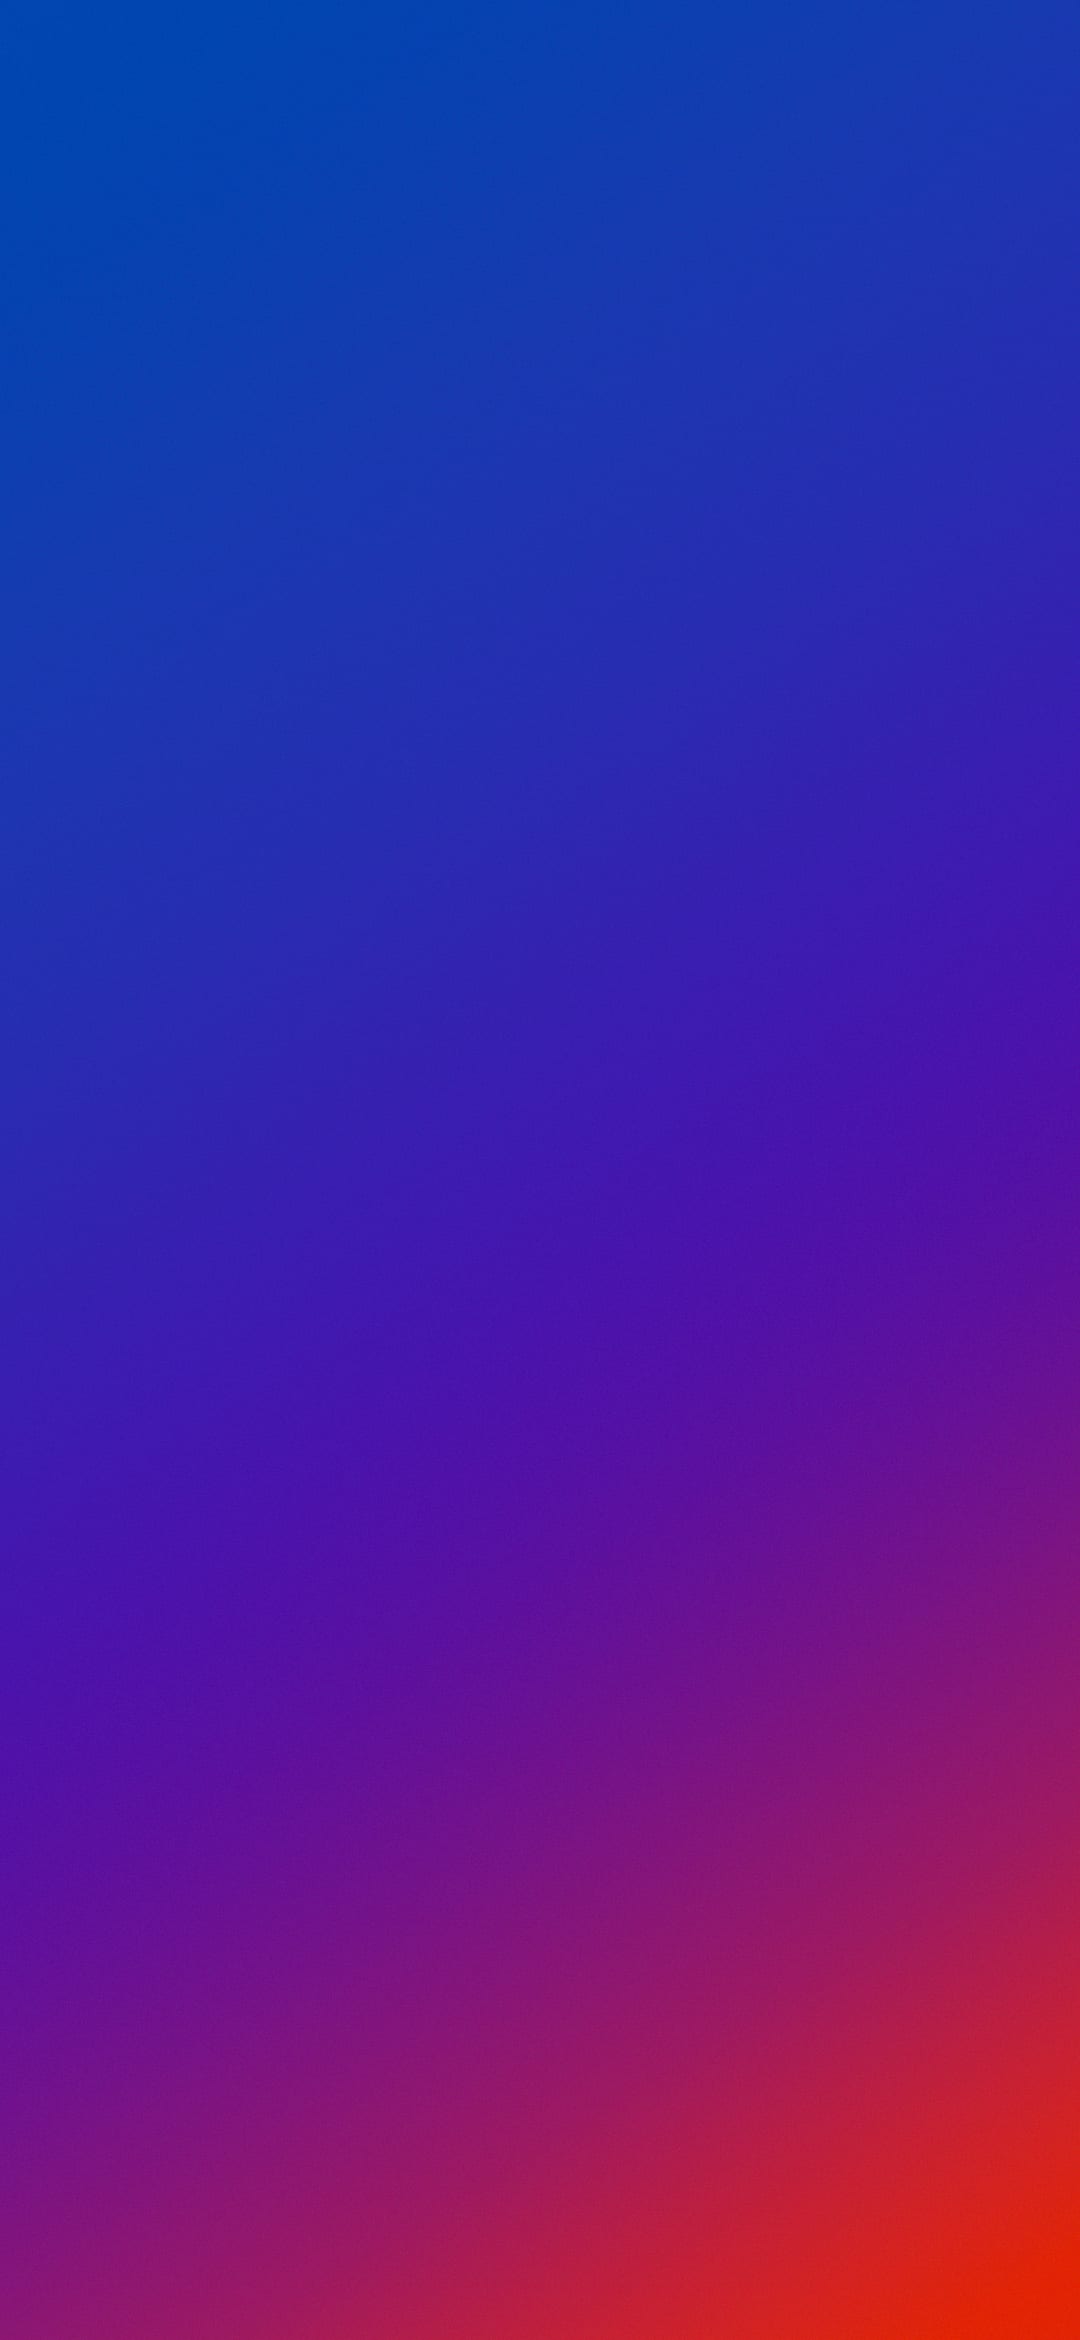 Lenovo Z5s and S5 Pro HD Wallpapers